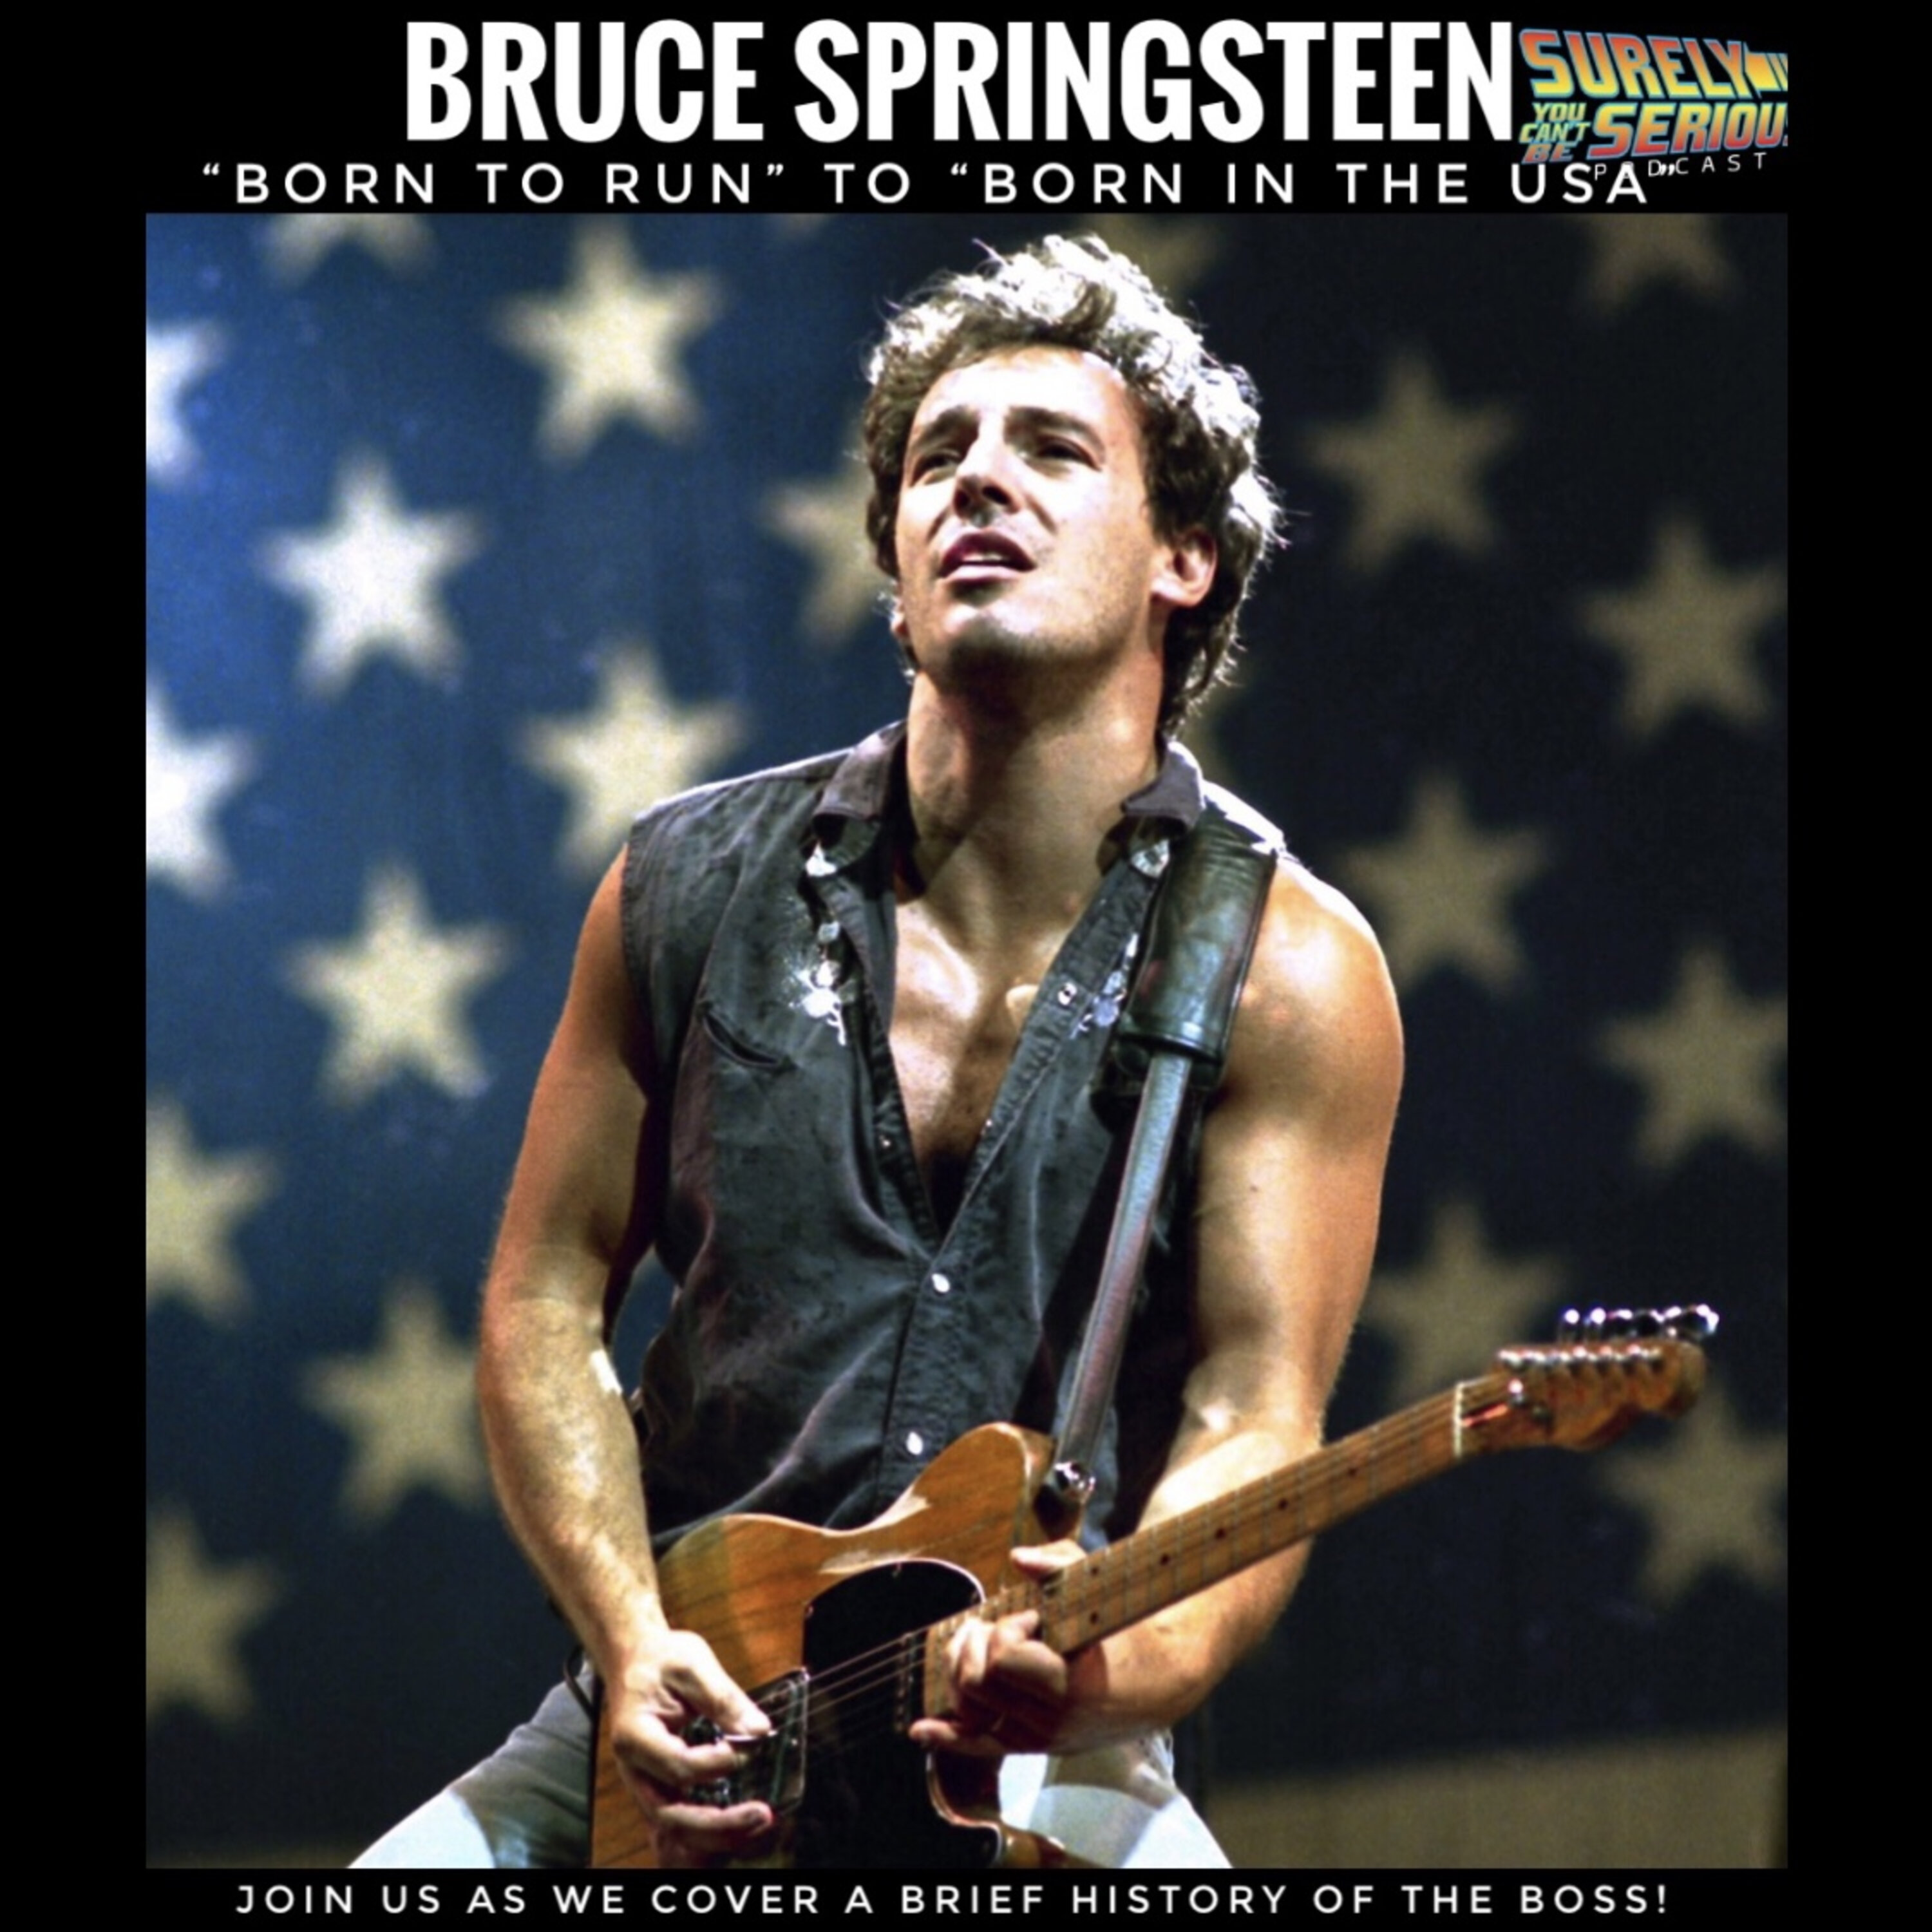 Bruce Springsteen: "Born to Run" to "Born in the USA"